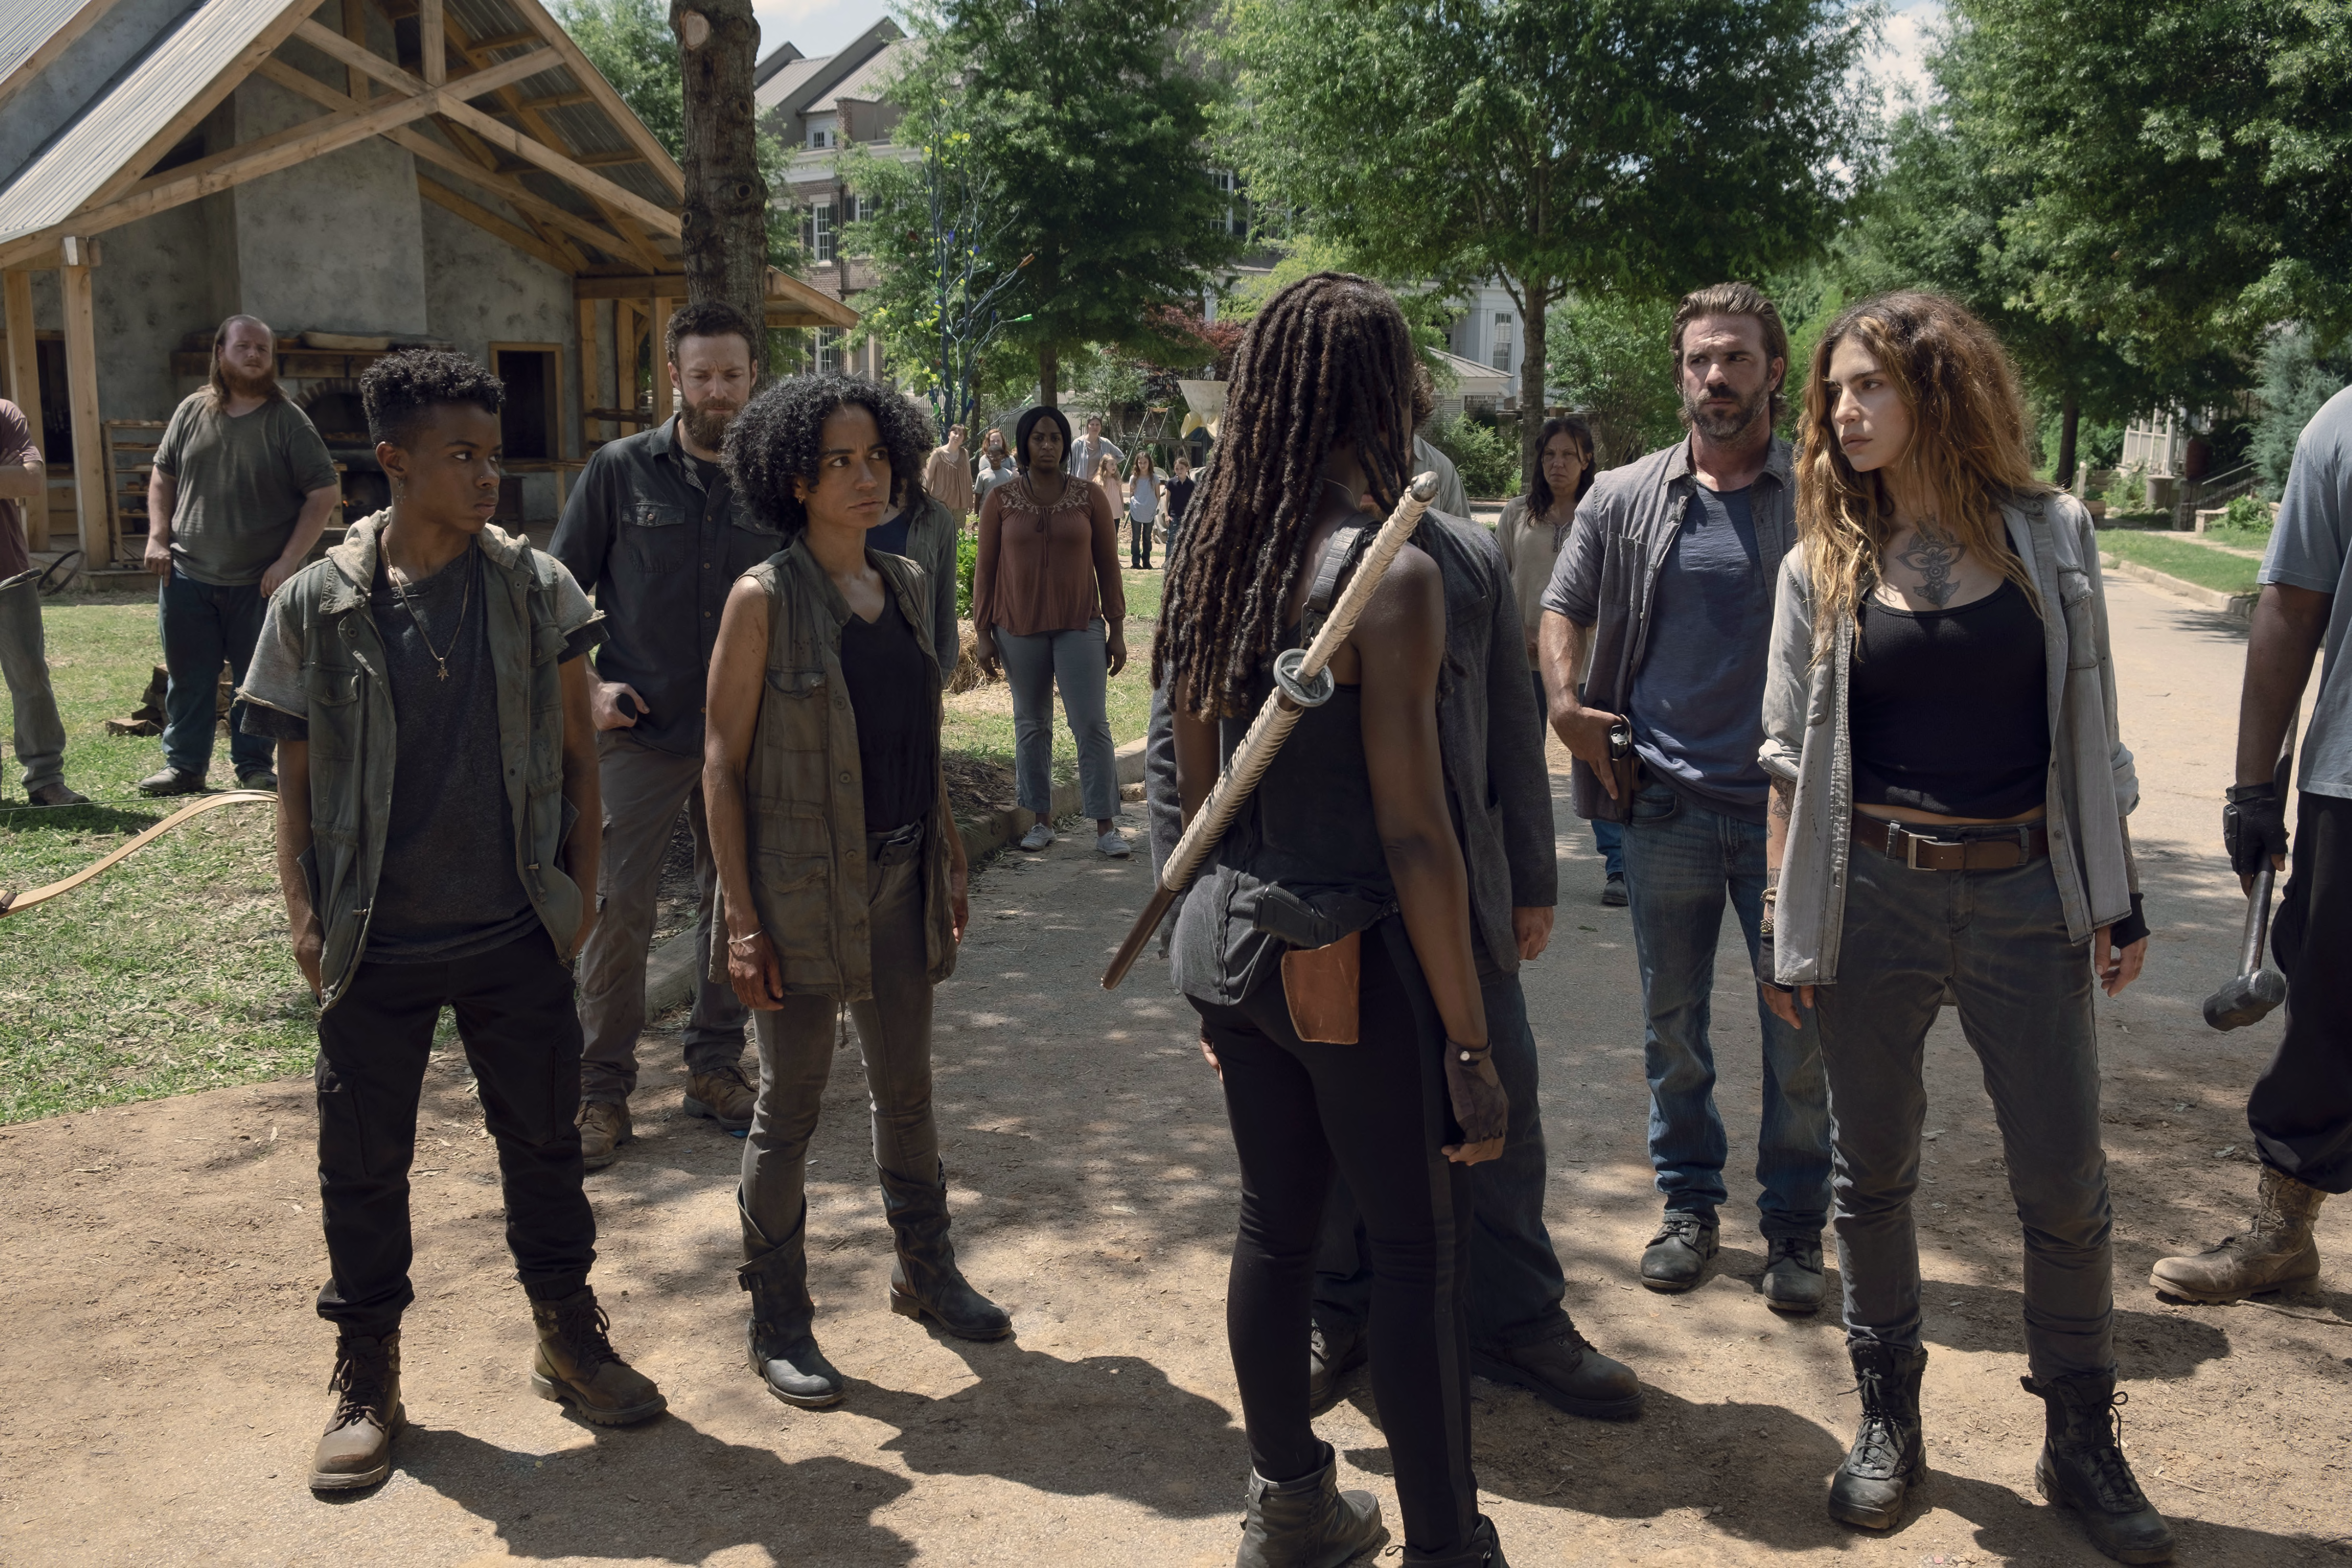 The Walking Dead 9B preview: 909, 910 offer a bold new path - Page 4